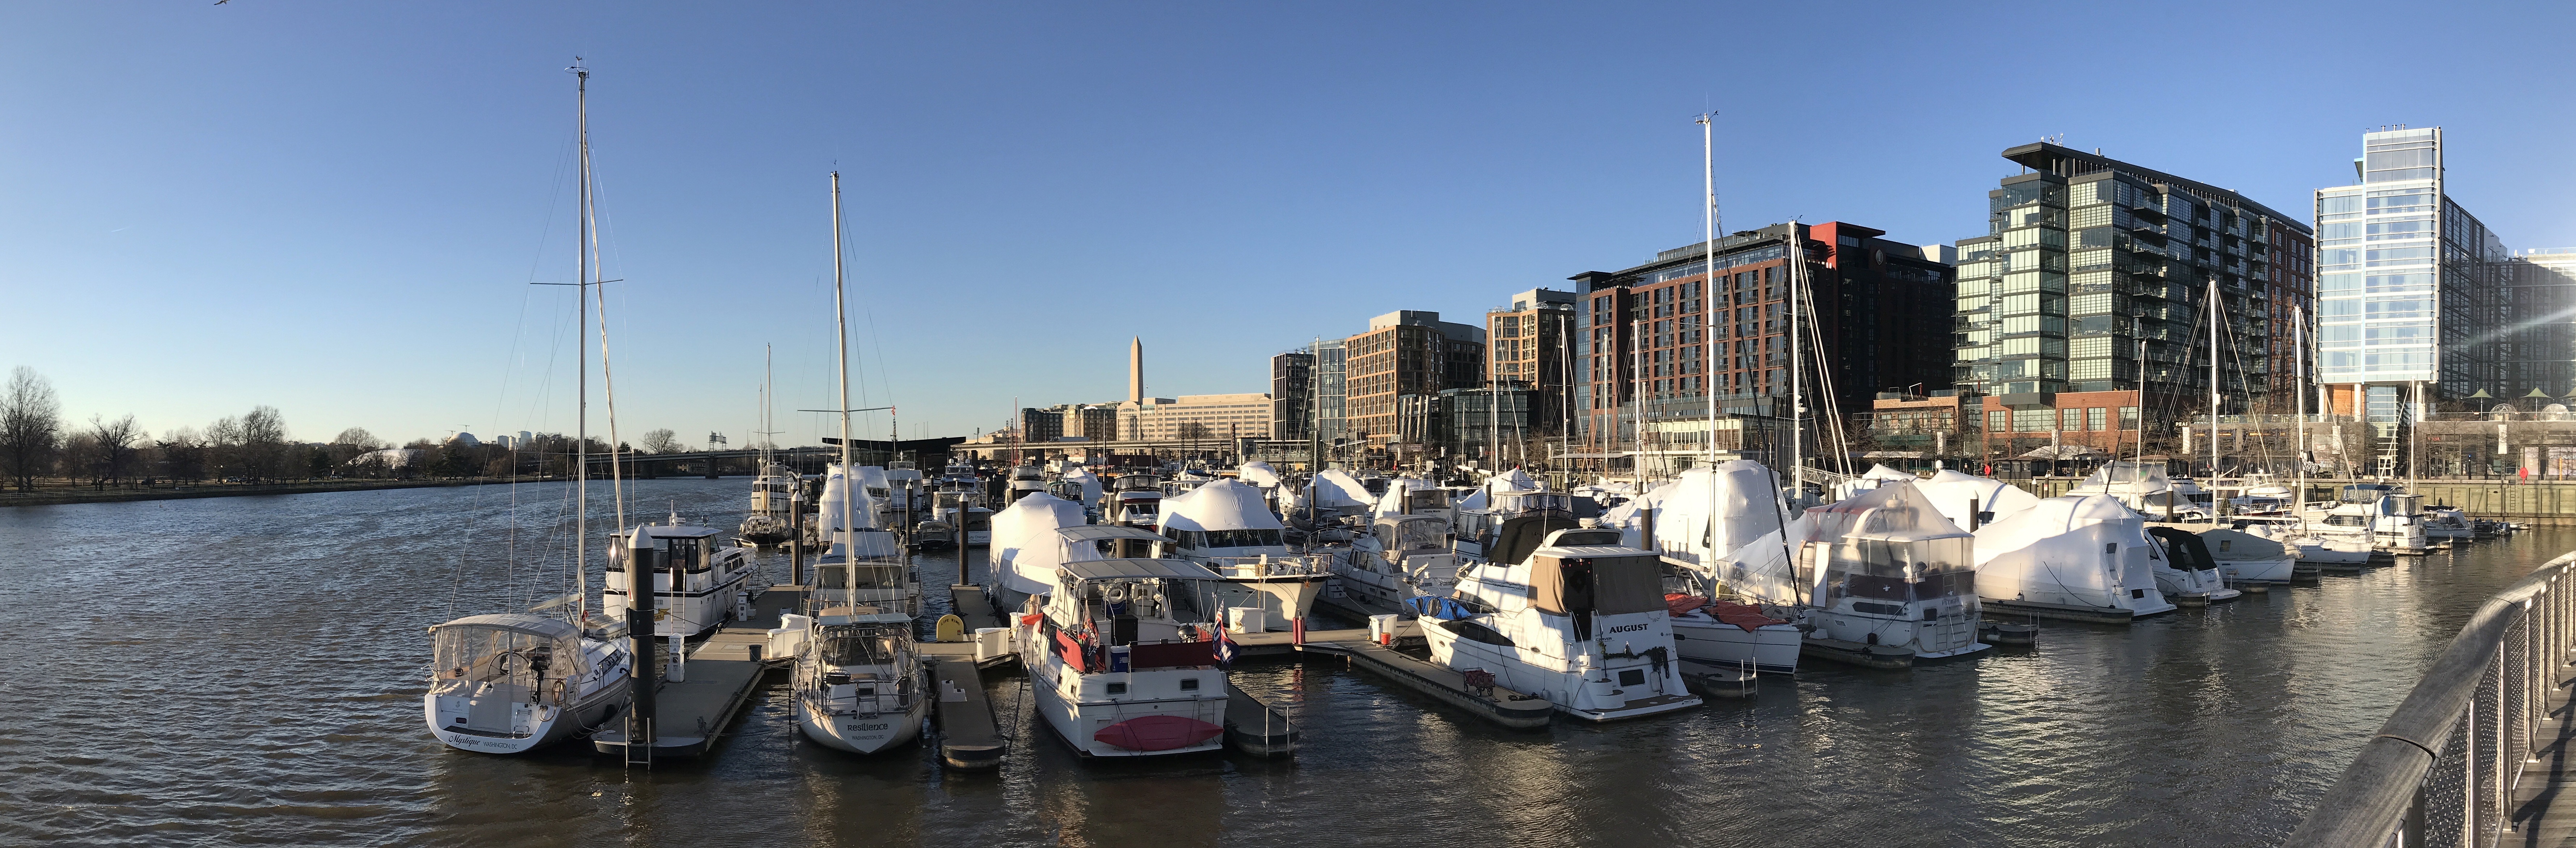 Sunlit Late Afternoon Panorama of Marina with Buildings, Washington Monument in Background.